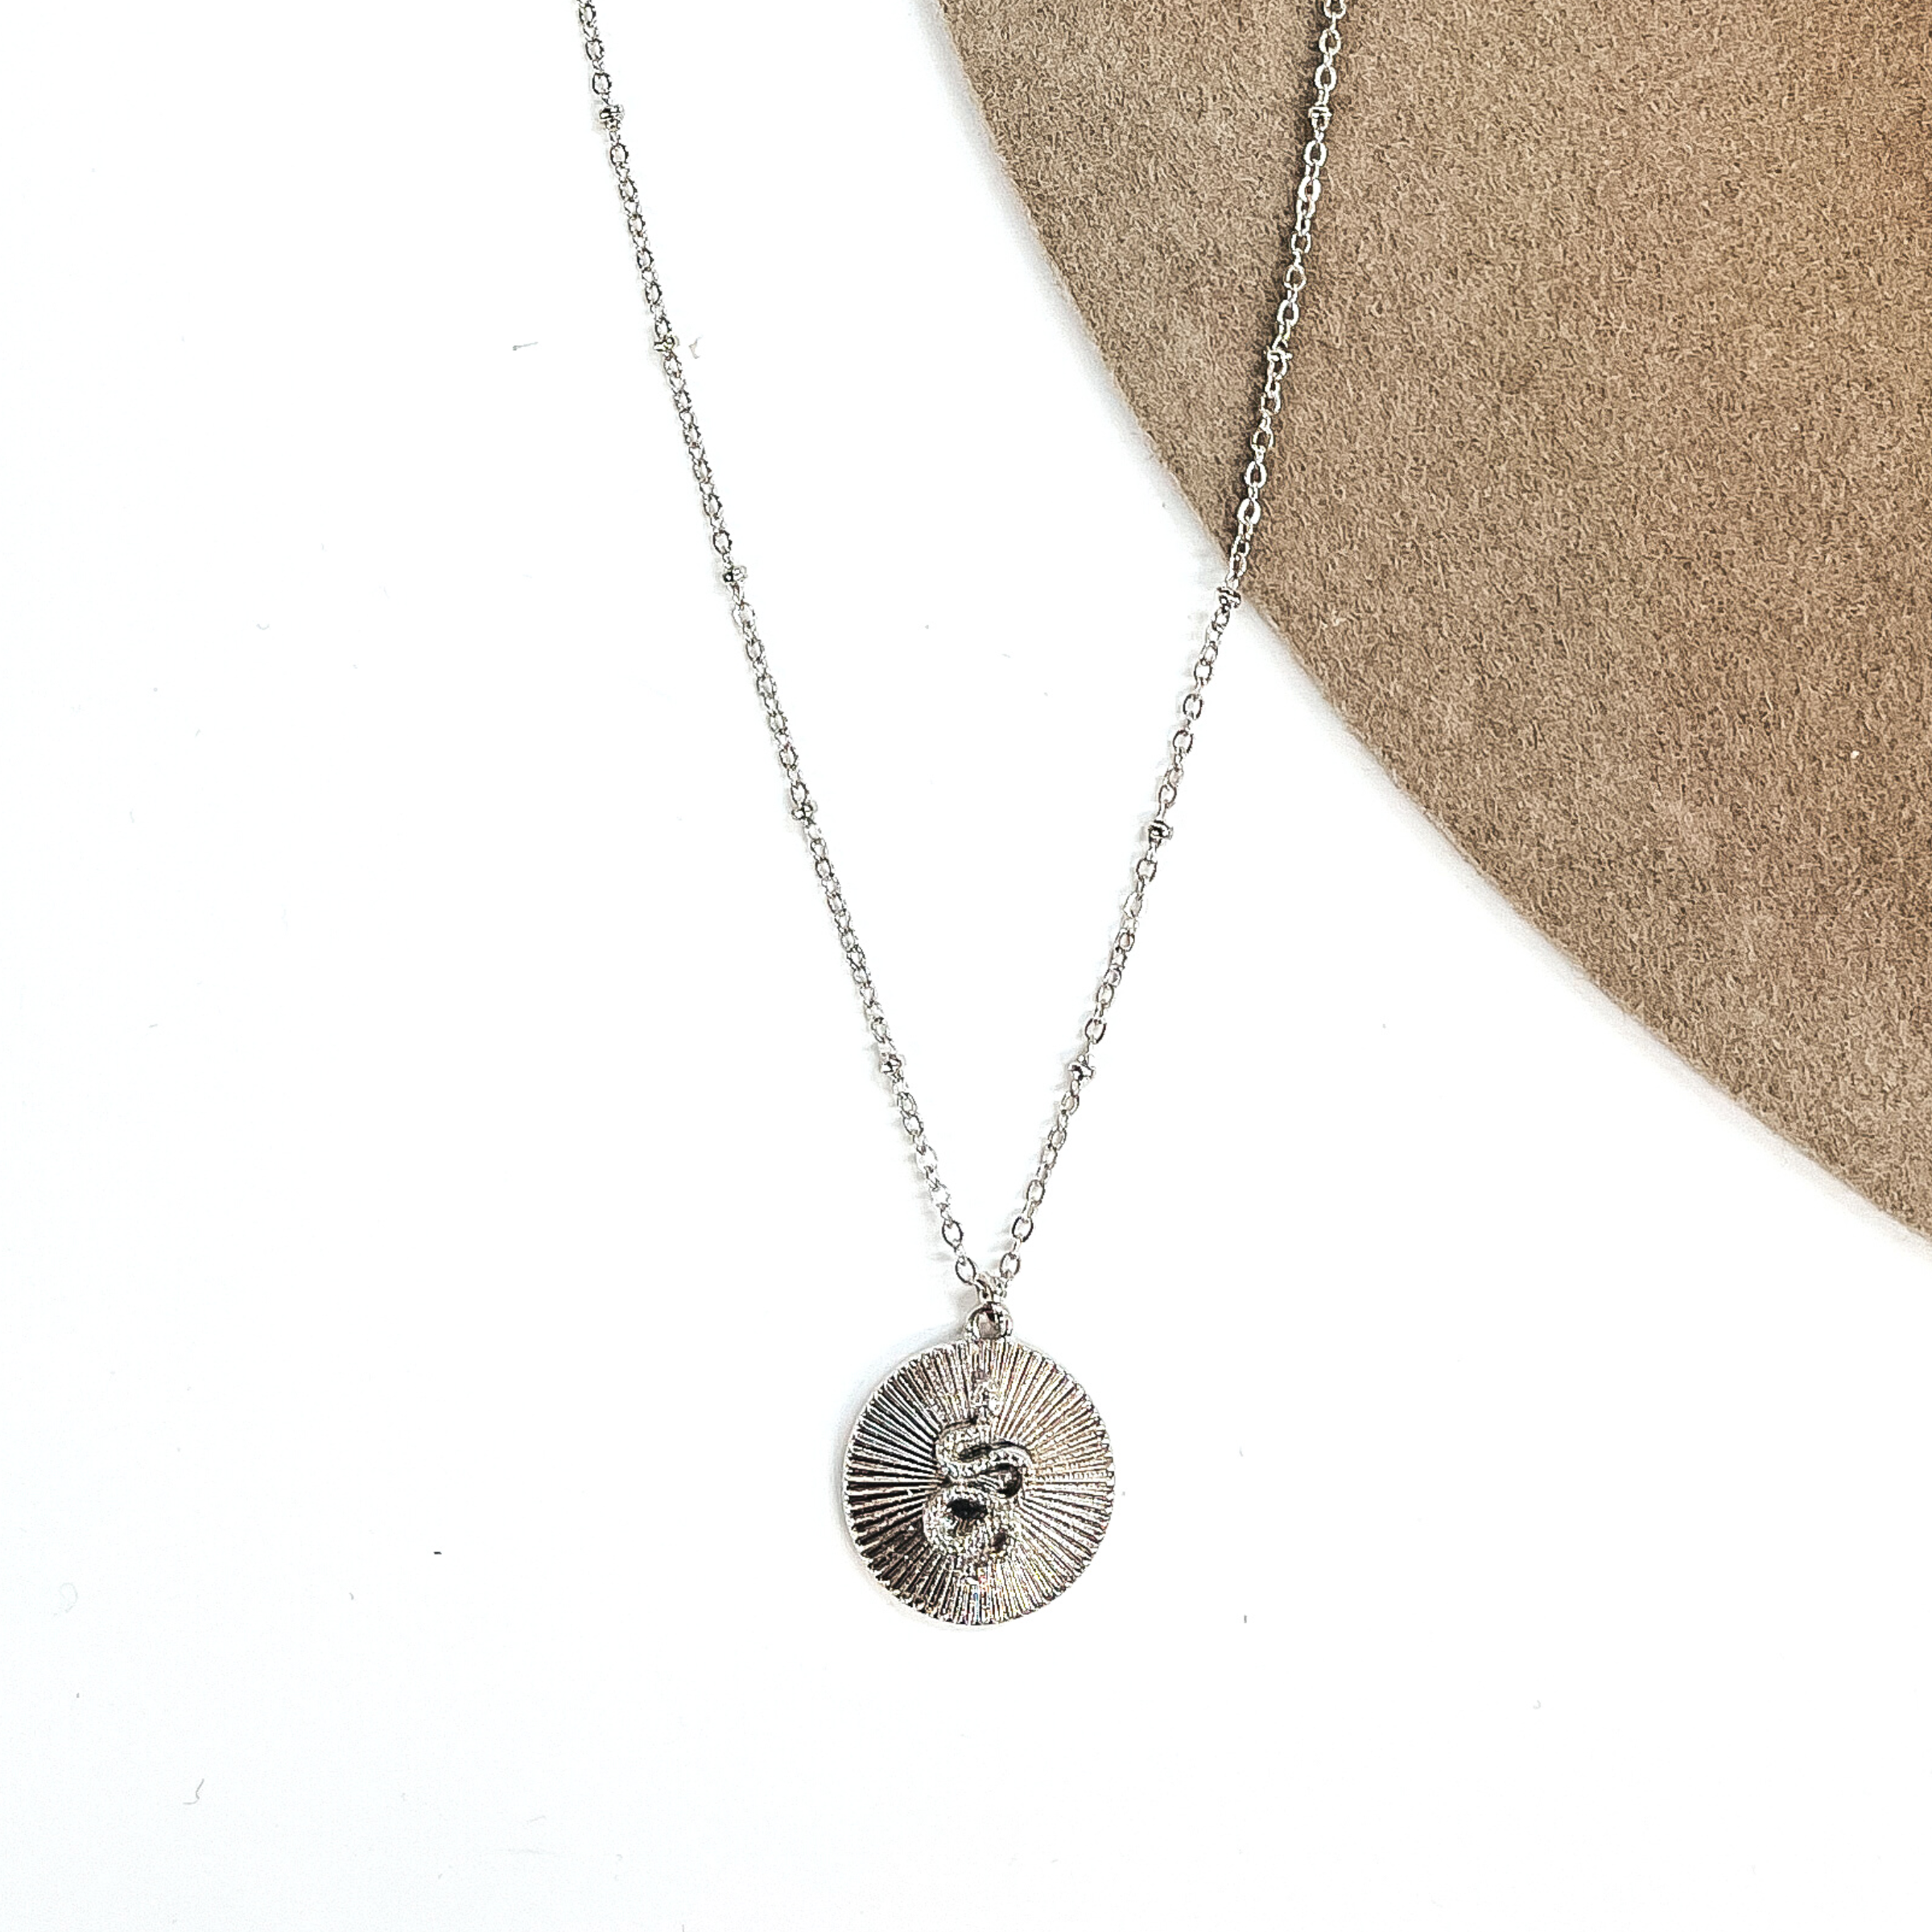 This is a small thin silver chain necklace with a small circle pendant in  textured sunburst. The pendant has a small snake in the center. This necklace  is taken on a white background and on a beige felt hat.